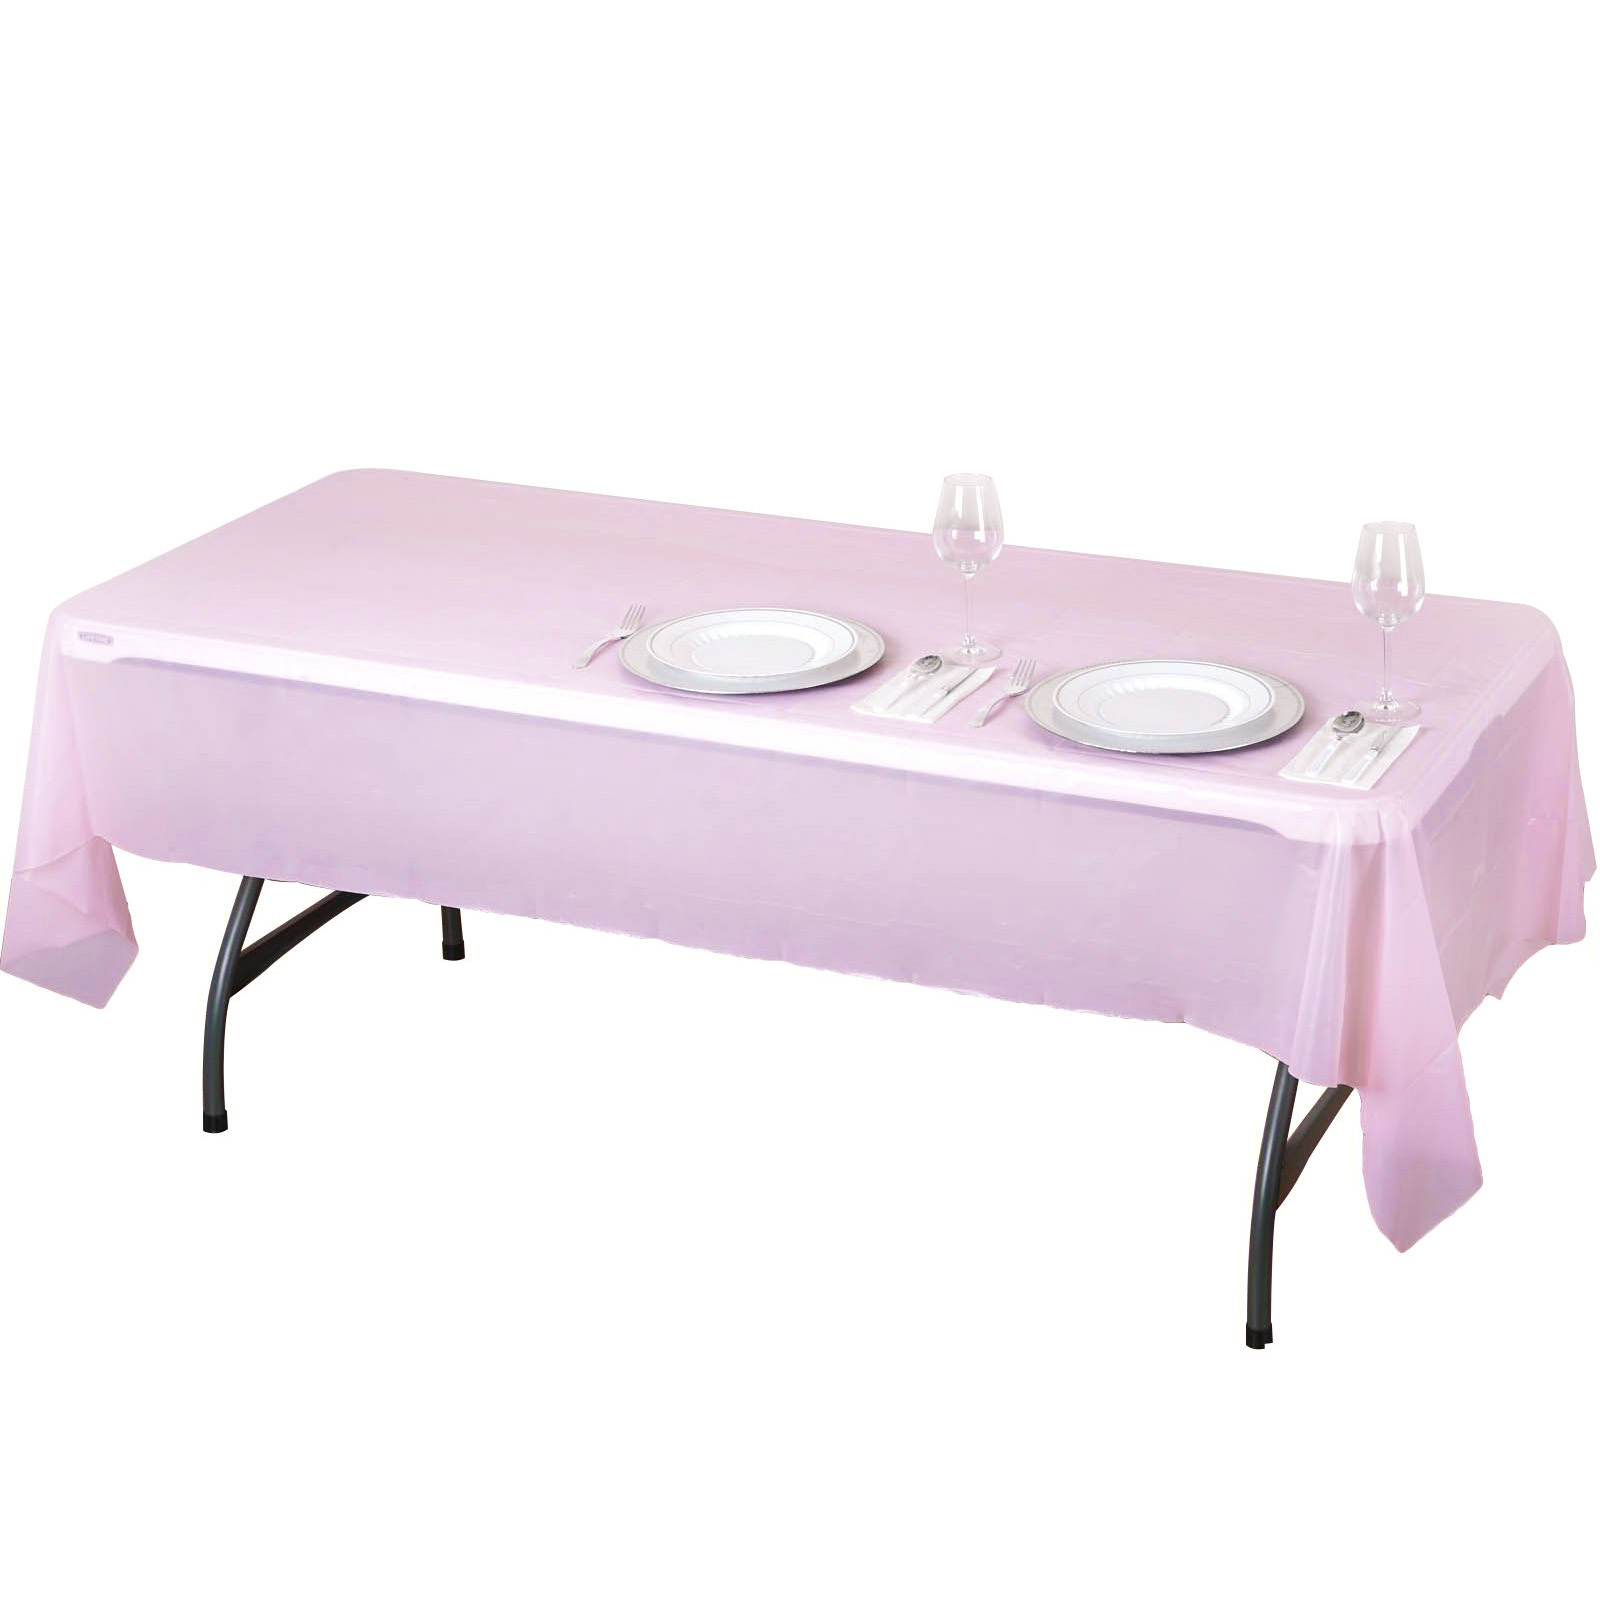 Disposable Tablecloth Large Rectangle Party Table Cloth Cover (Pink)